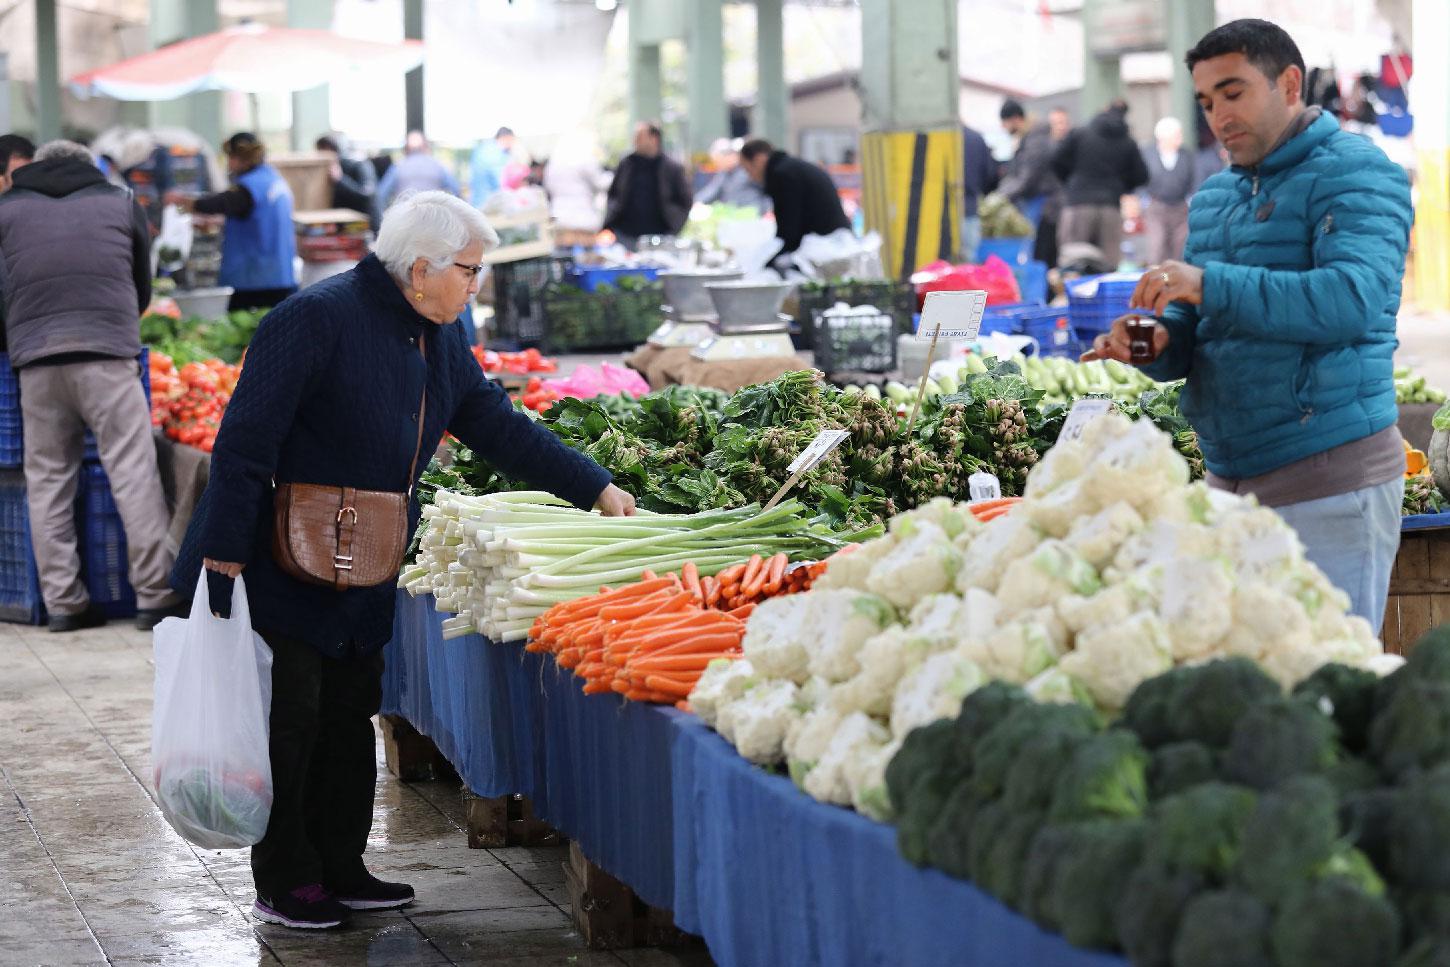 A woman shops for vegetables at a market in the Turkish capital Ankara, on February 13, 2019.